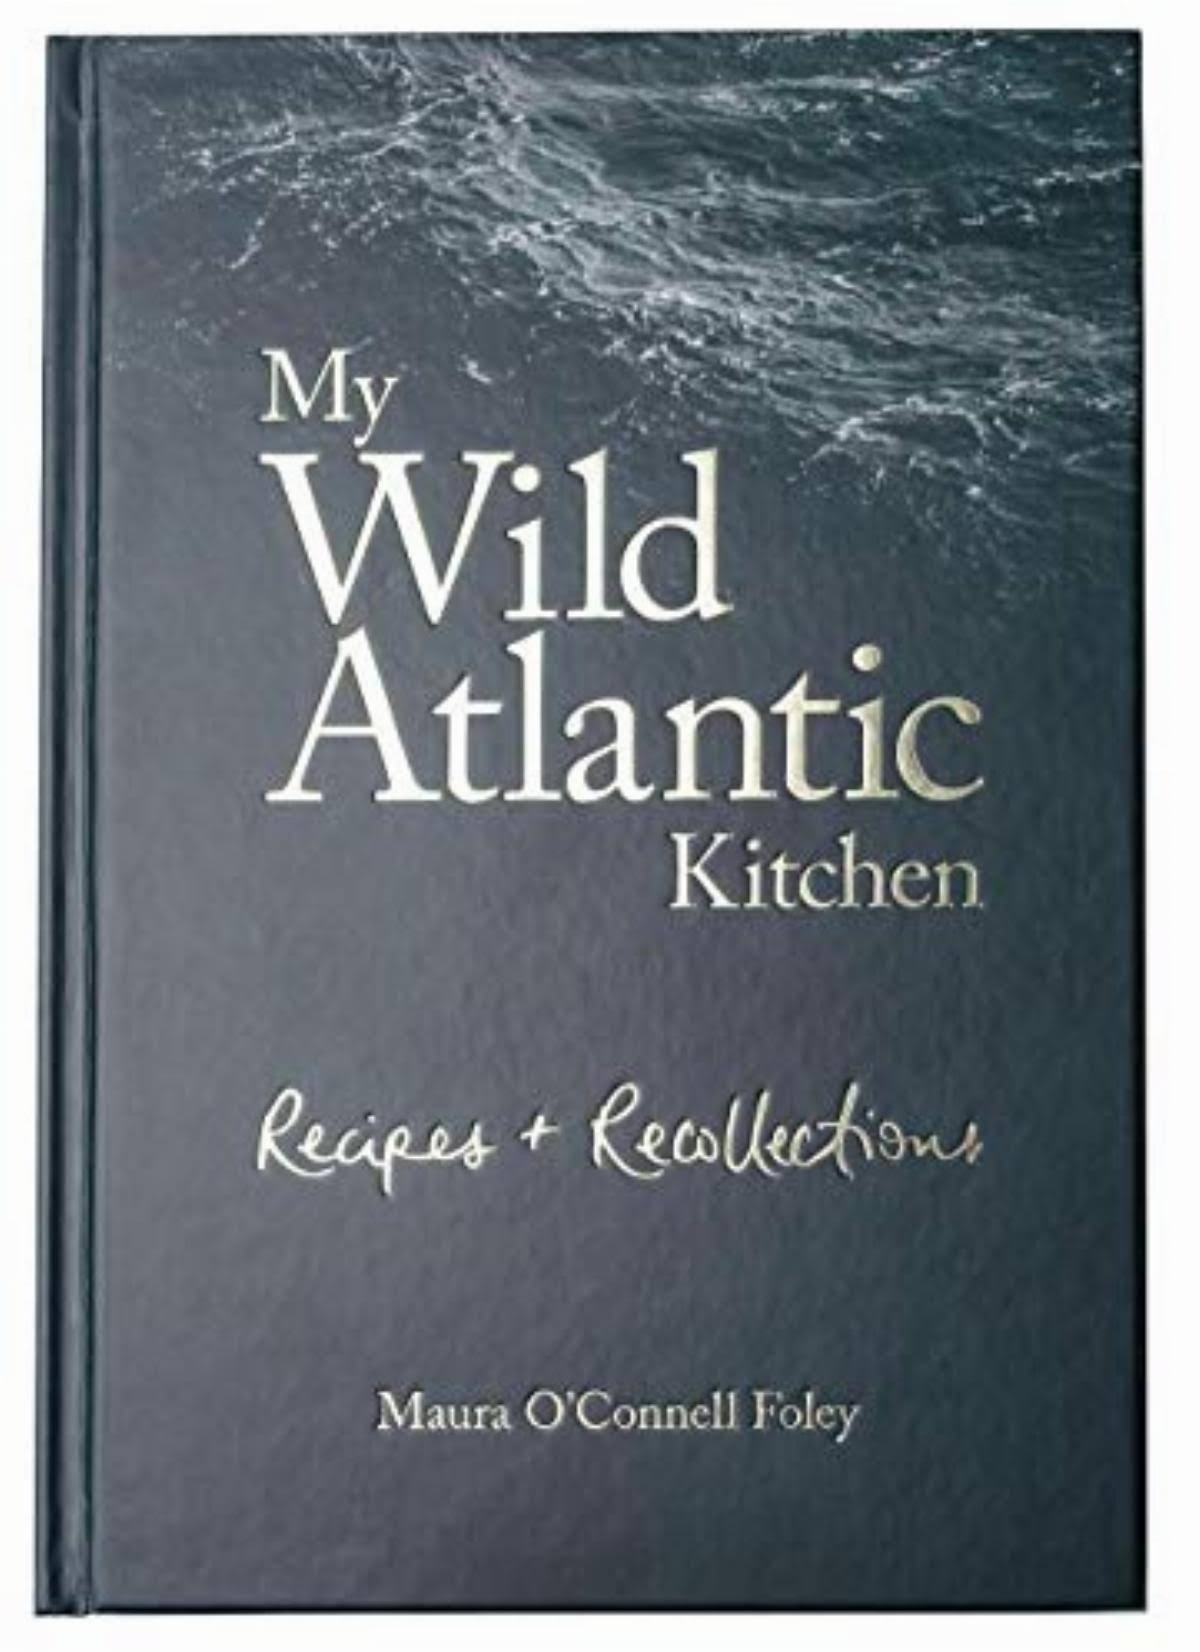 My Wild Atlantic Kitchen by Maura O'Connell Foley